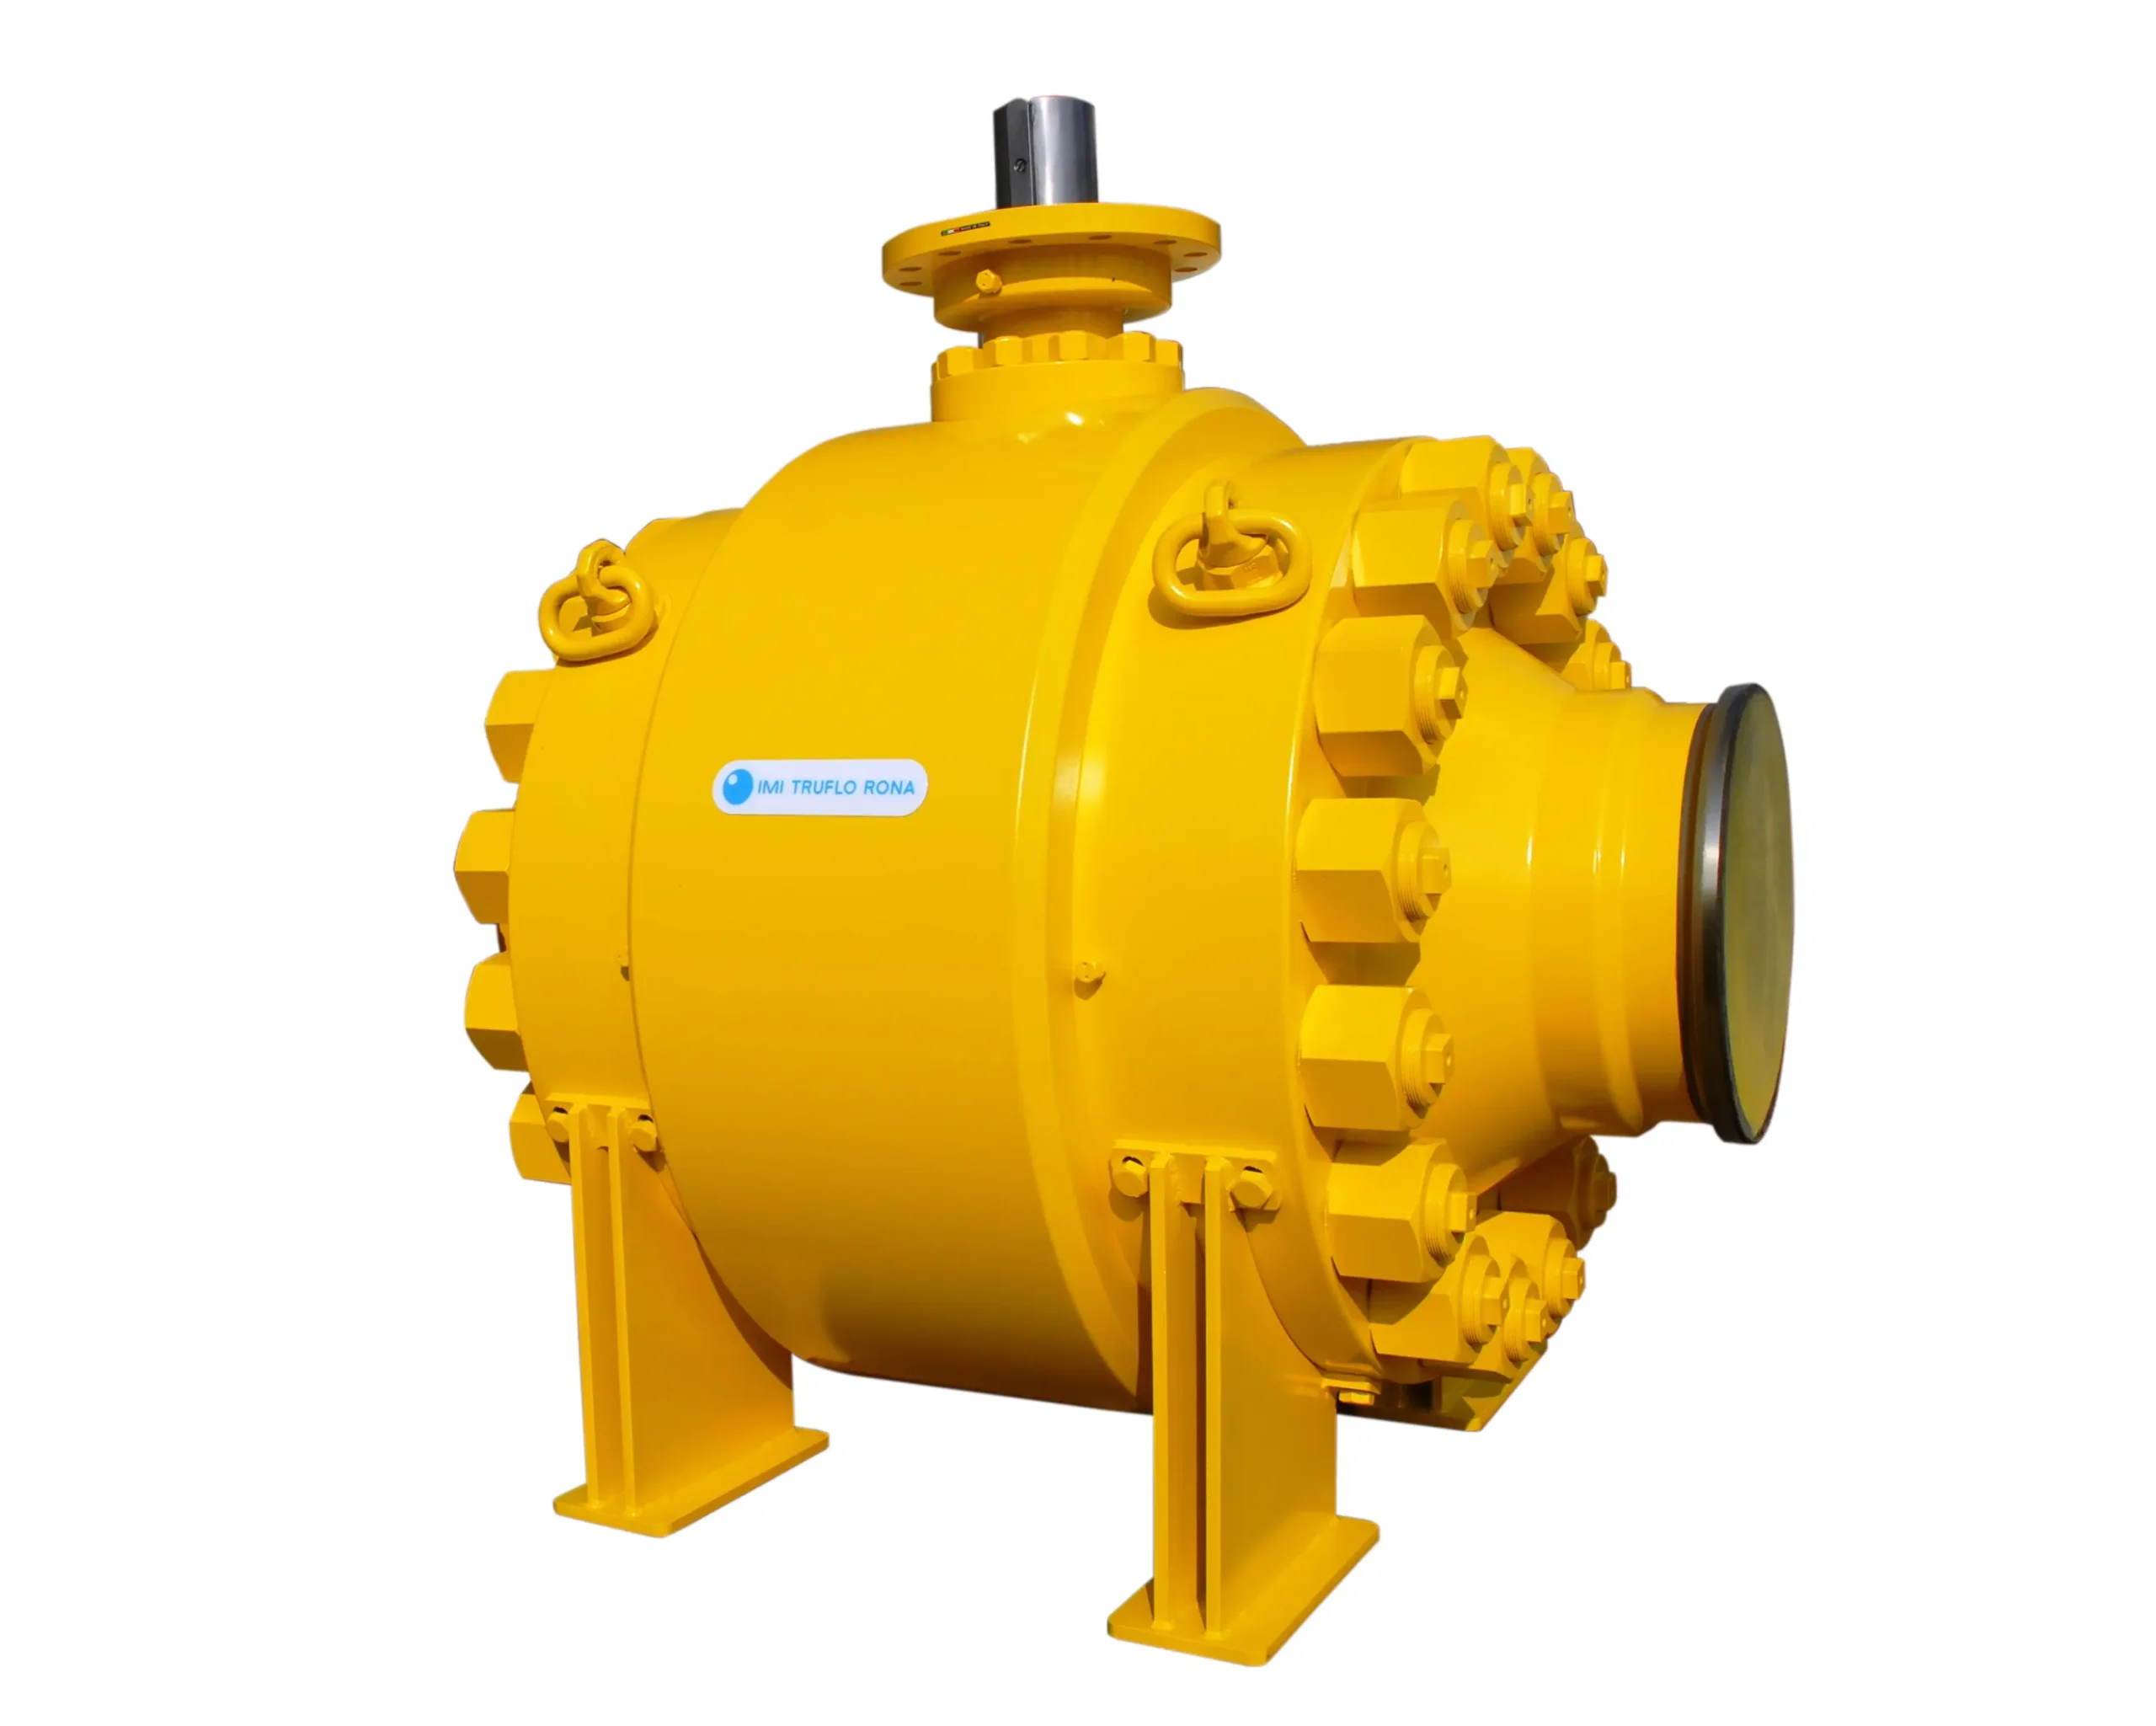 A large IMI Truflo Rona valve used in industrial applications for high-pressure and high-flow fluid control.